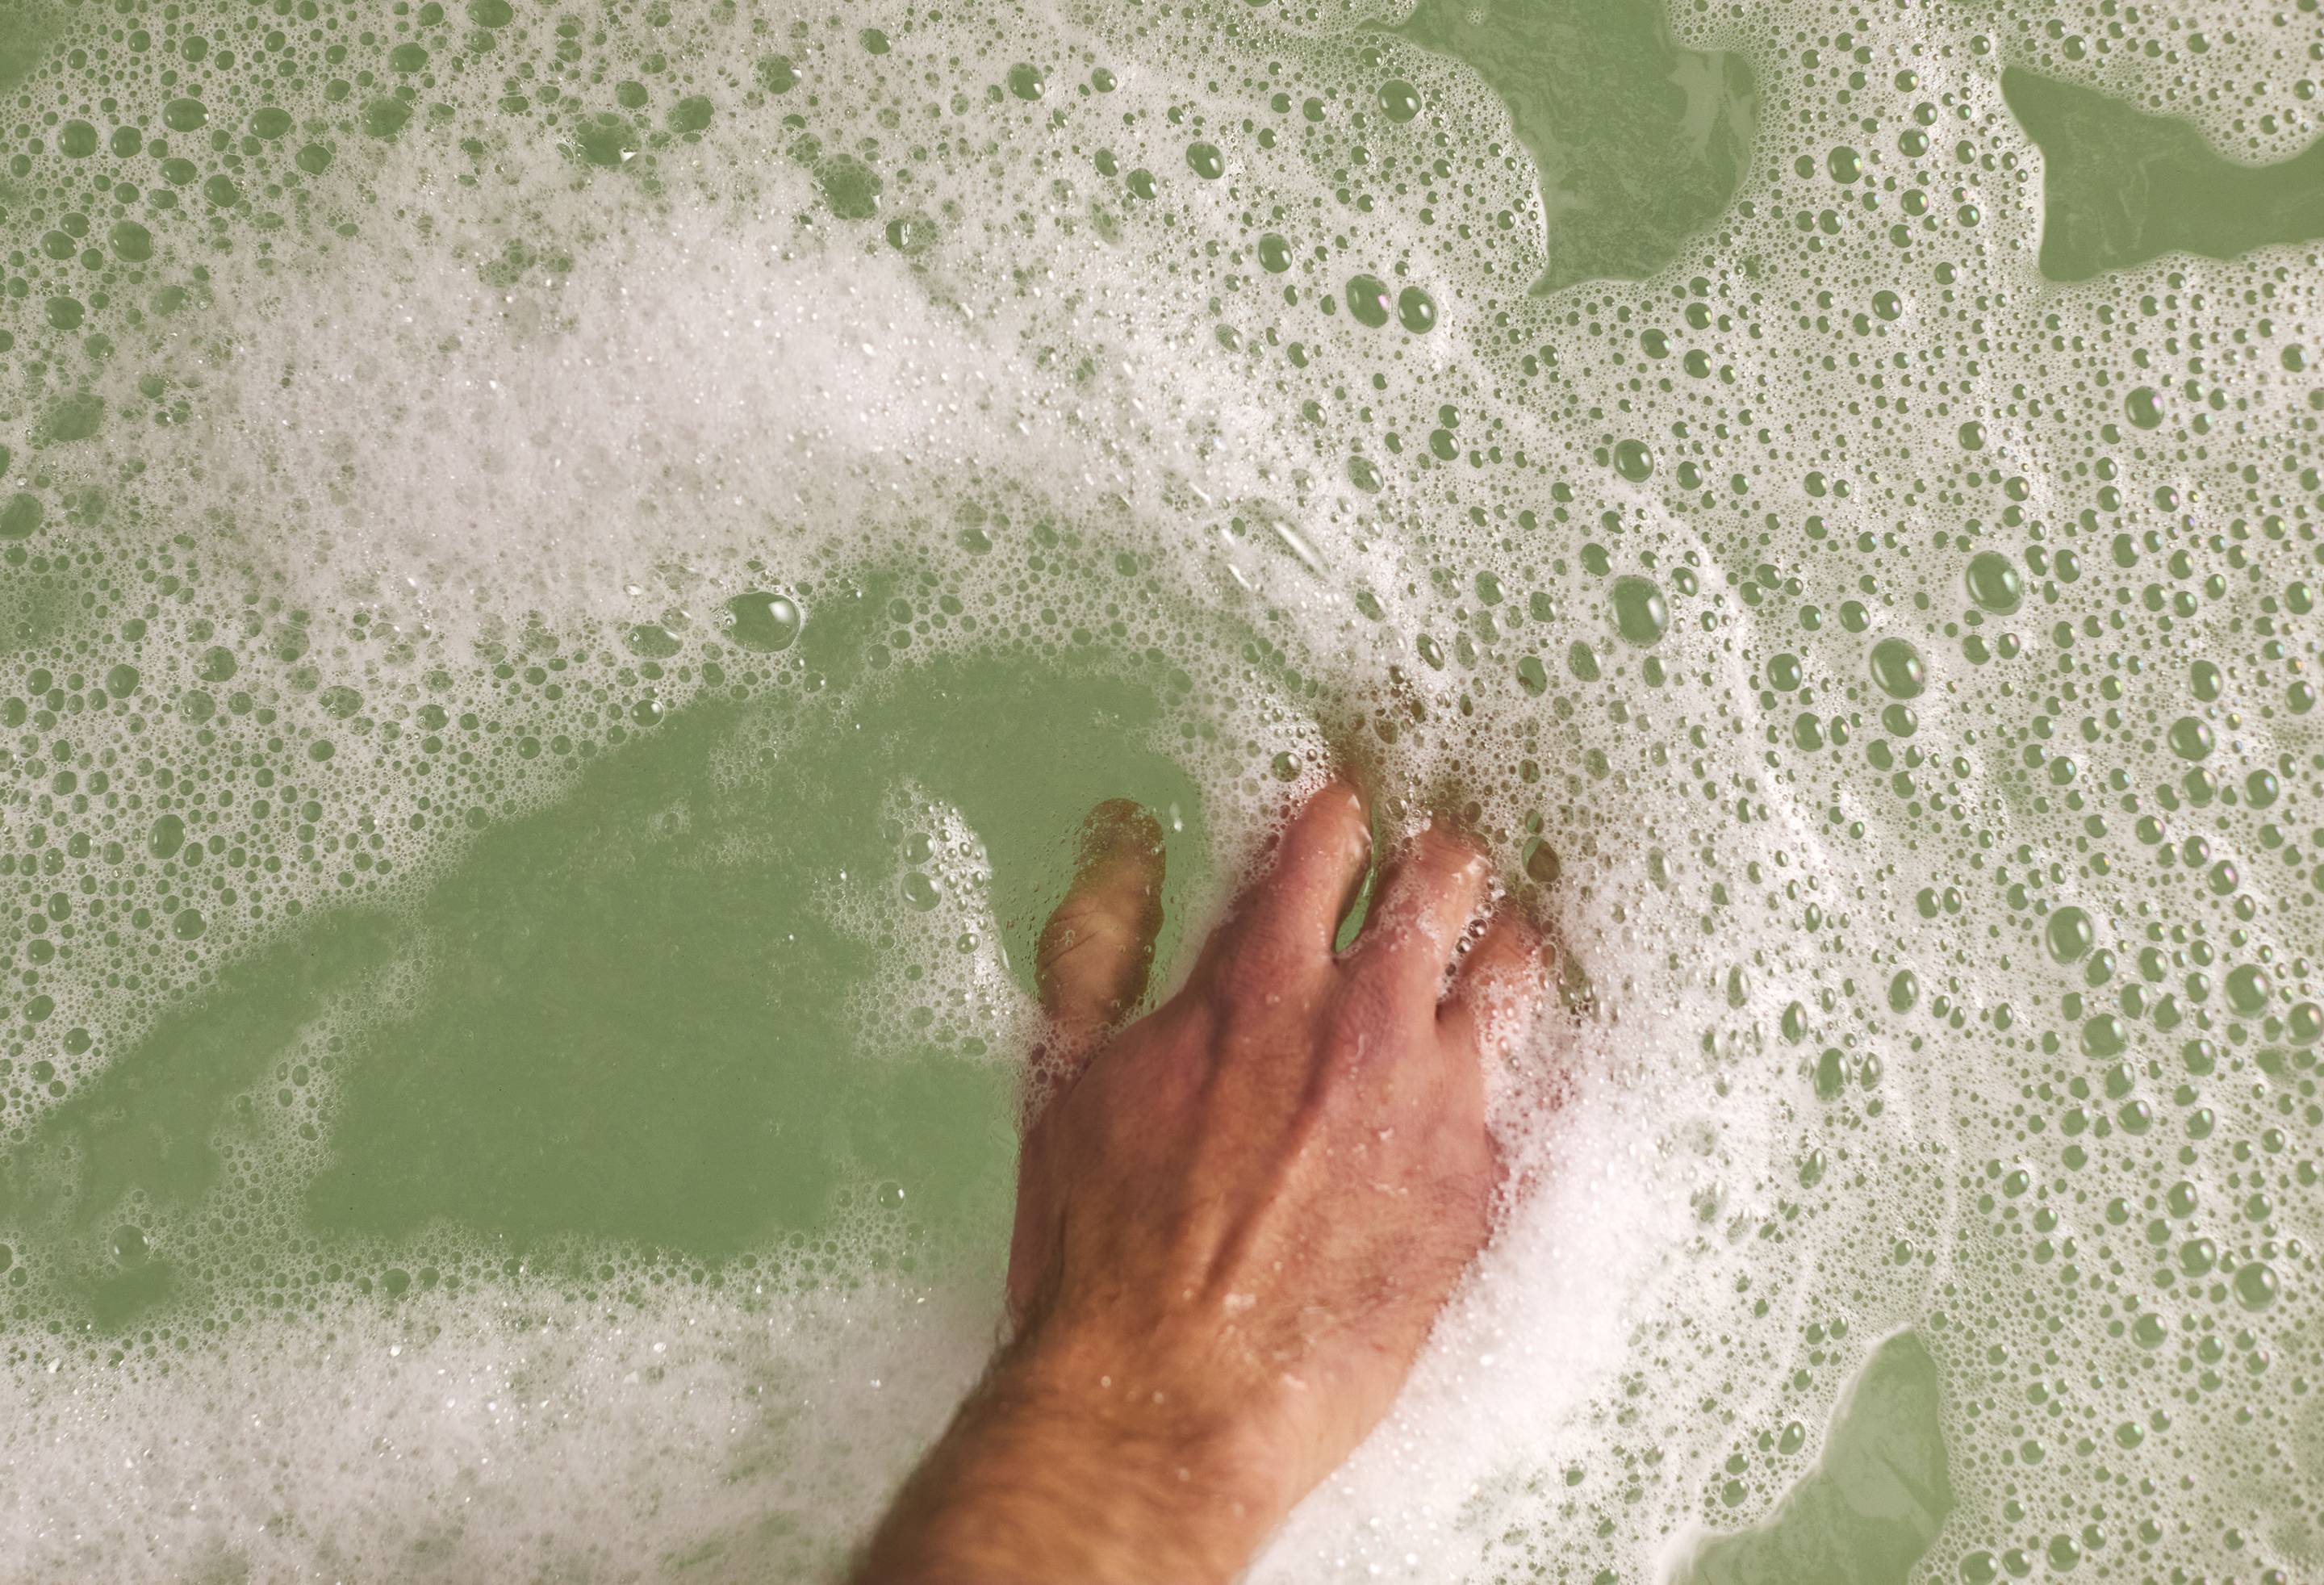 The image shows the model's hand gently stroking the bubbly, green water created by the Wash And Grow bubble bar.  